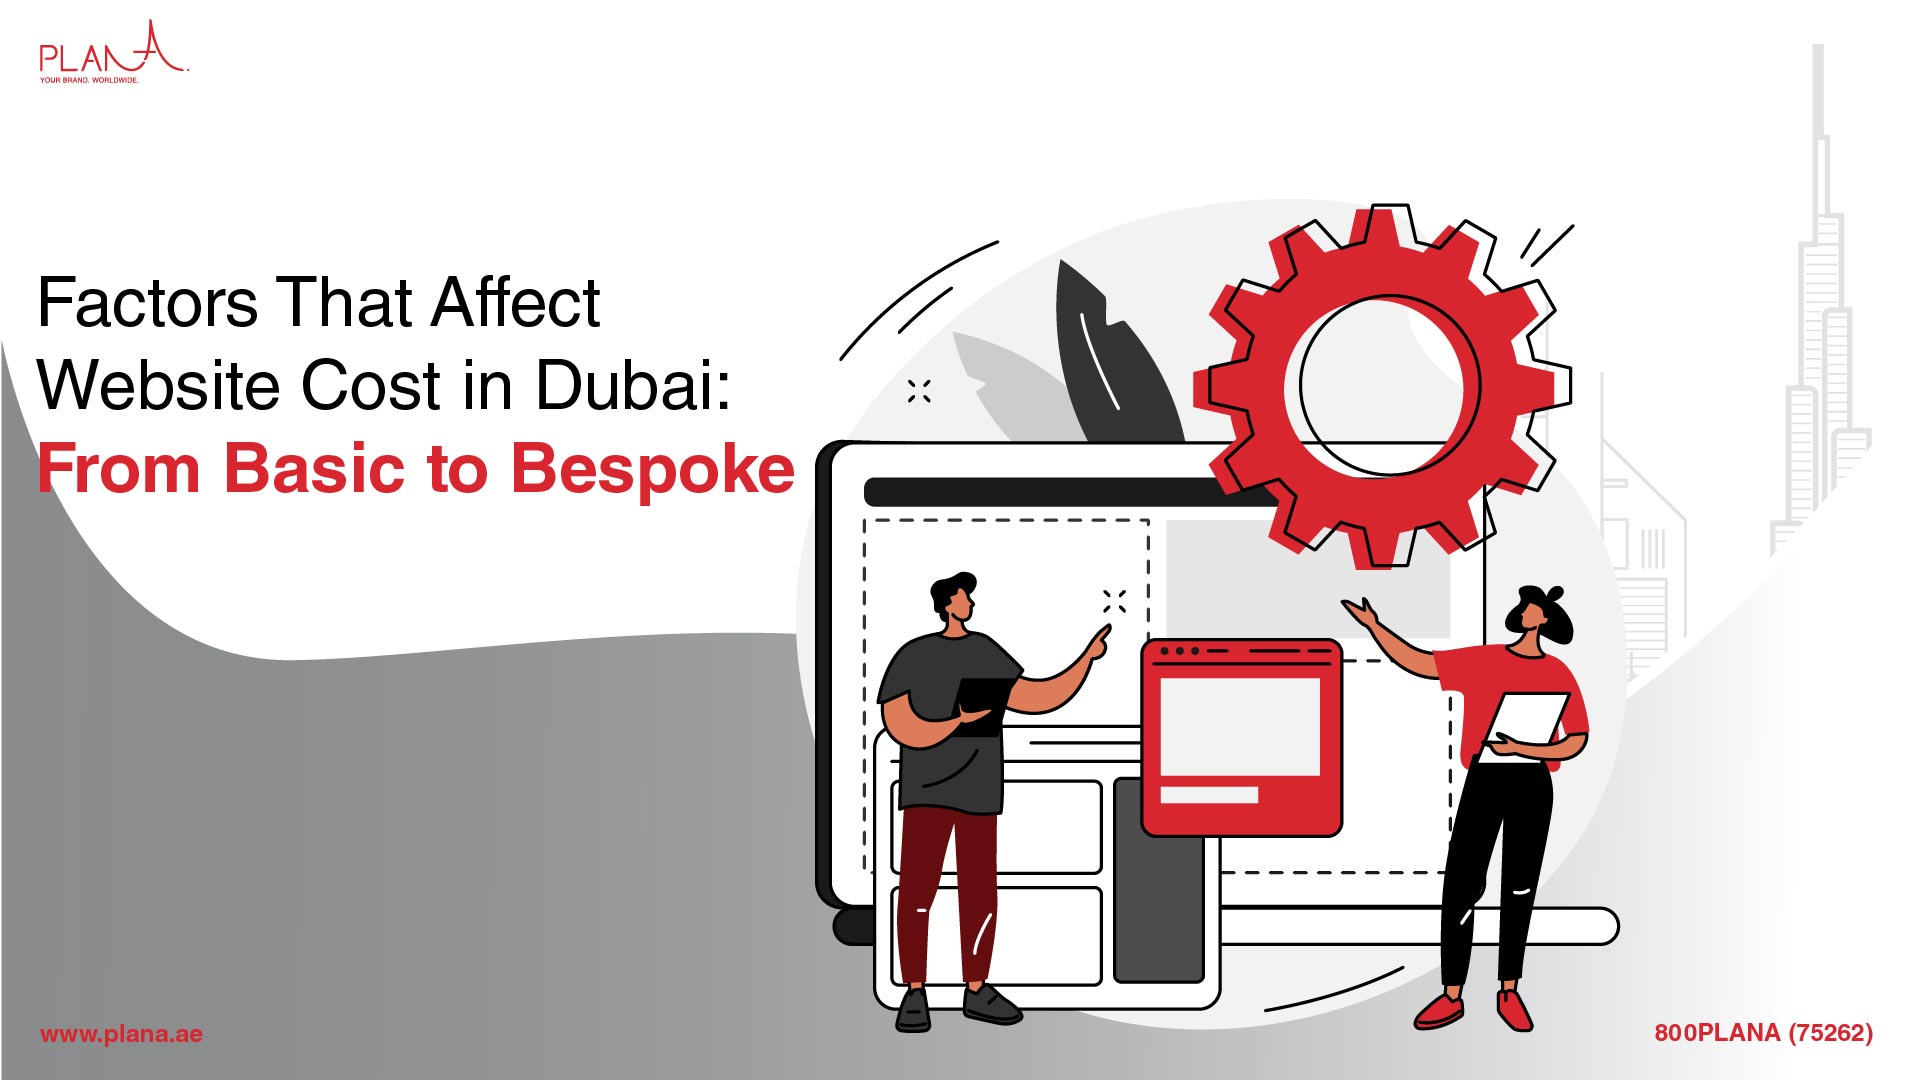 Factors That Affect Website Cost in Dubai: From Basic to Bespoke